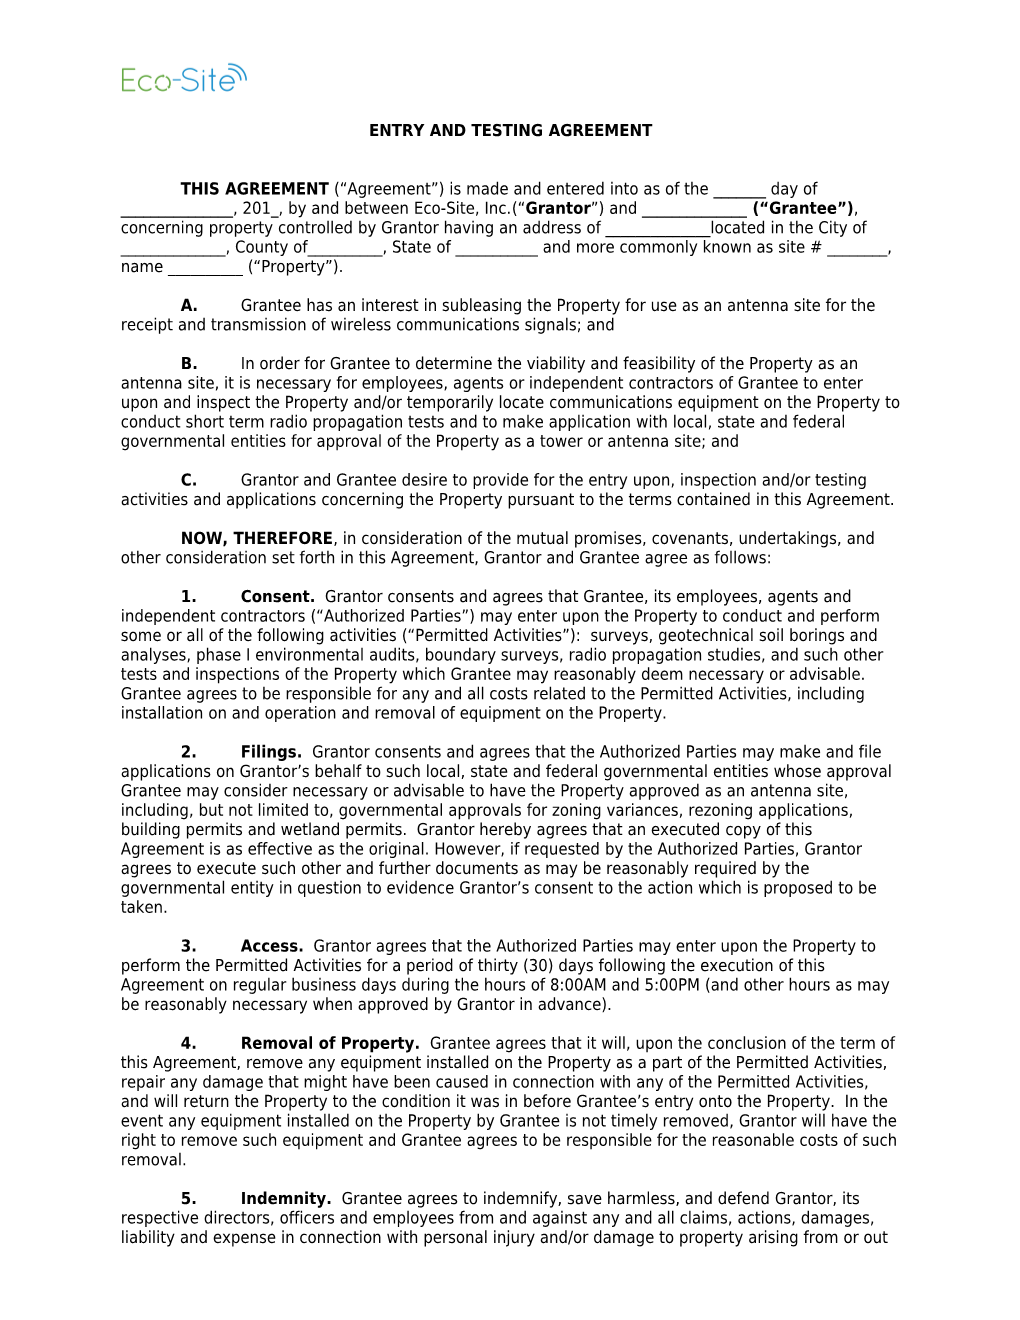 Entry and Testing Agreement